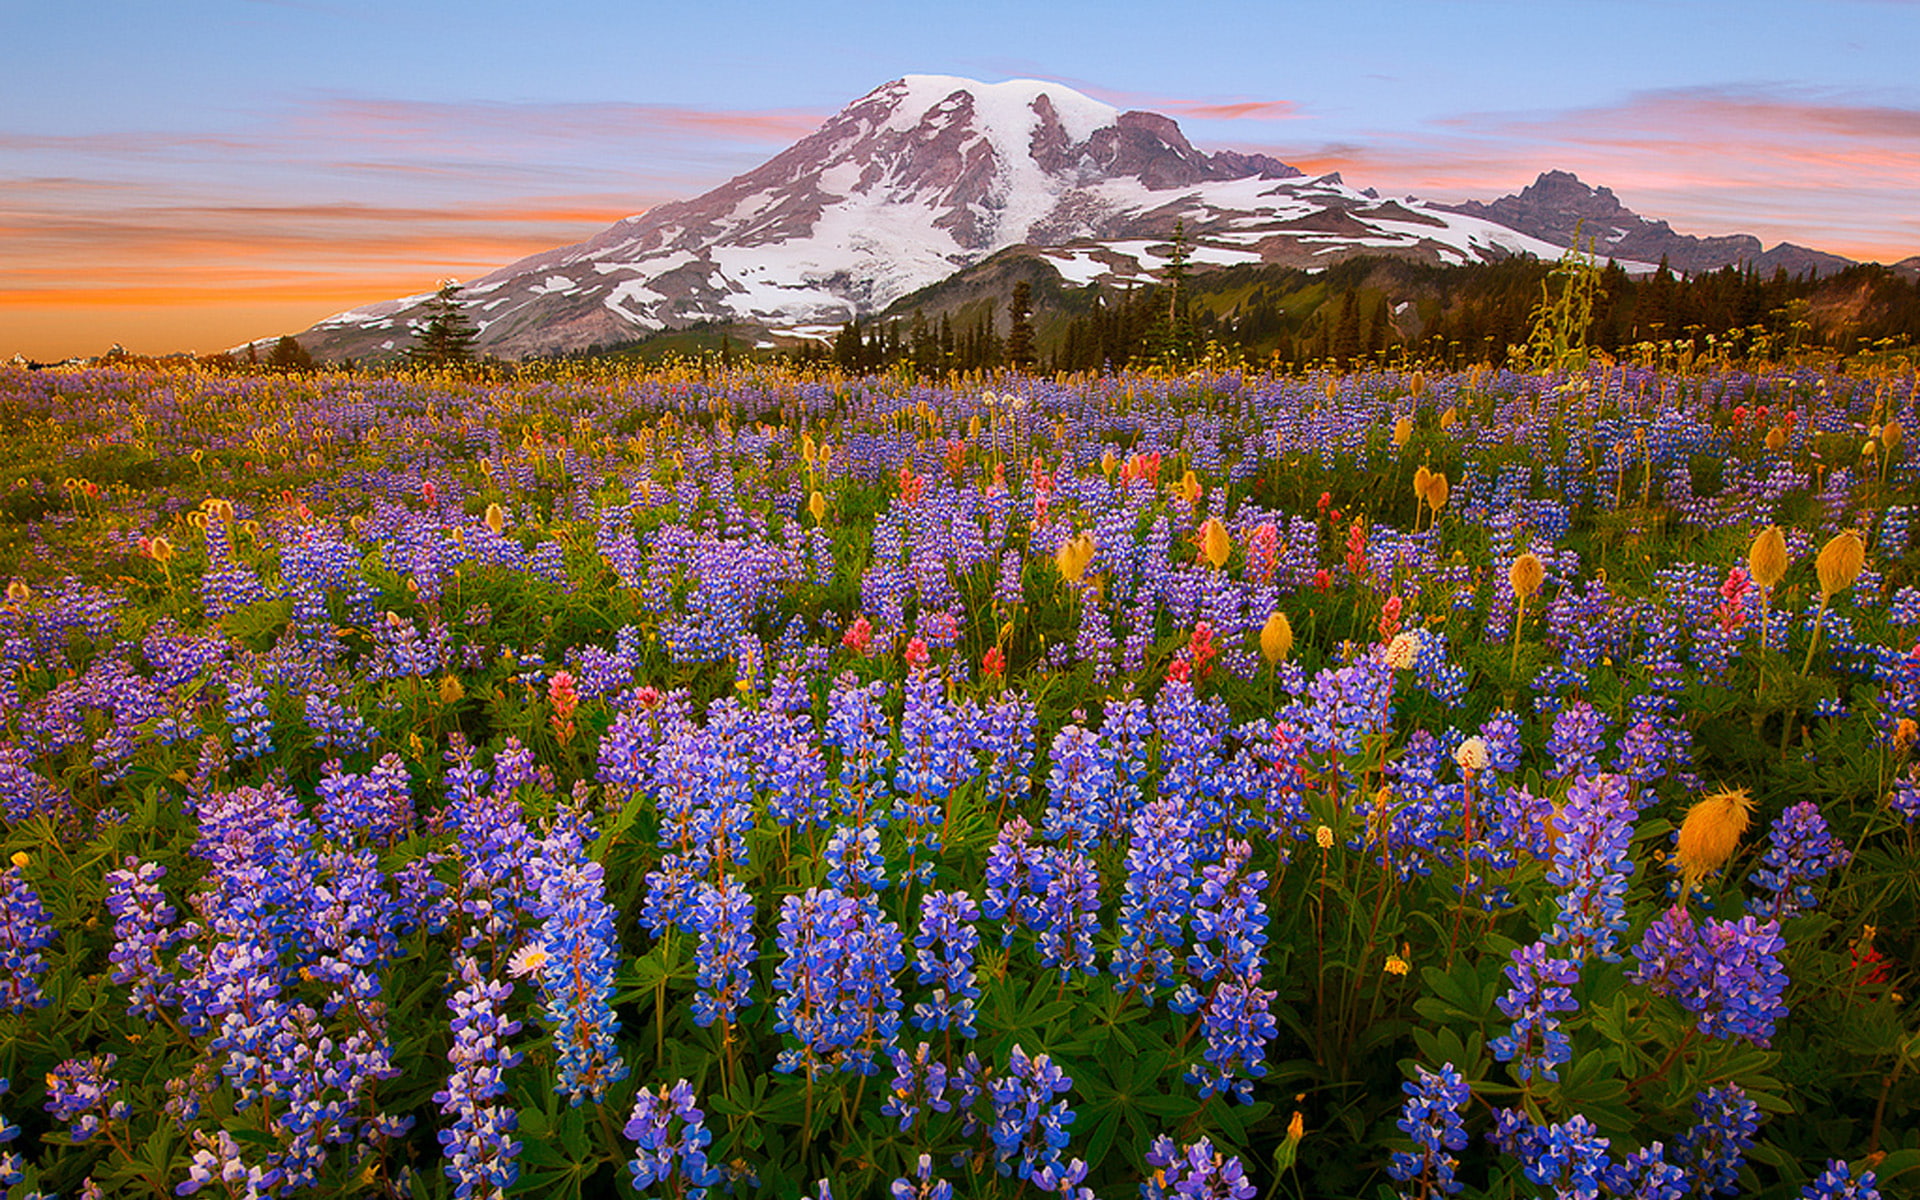 Mountain Wild Flowers In The Montierier Tolmie Peak National Park On Mount Rainier High 5,920 In The Cascade Area 1920×1200